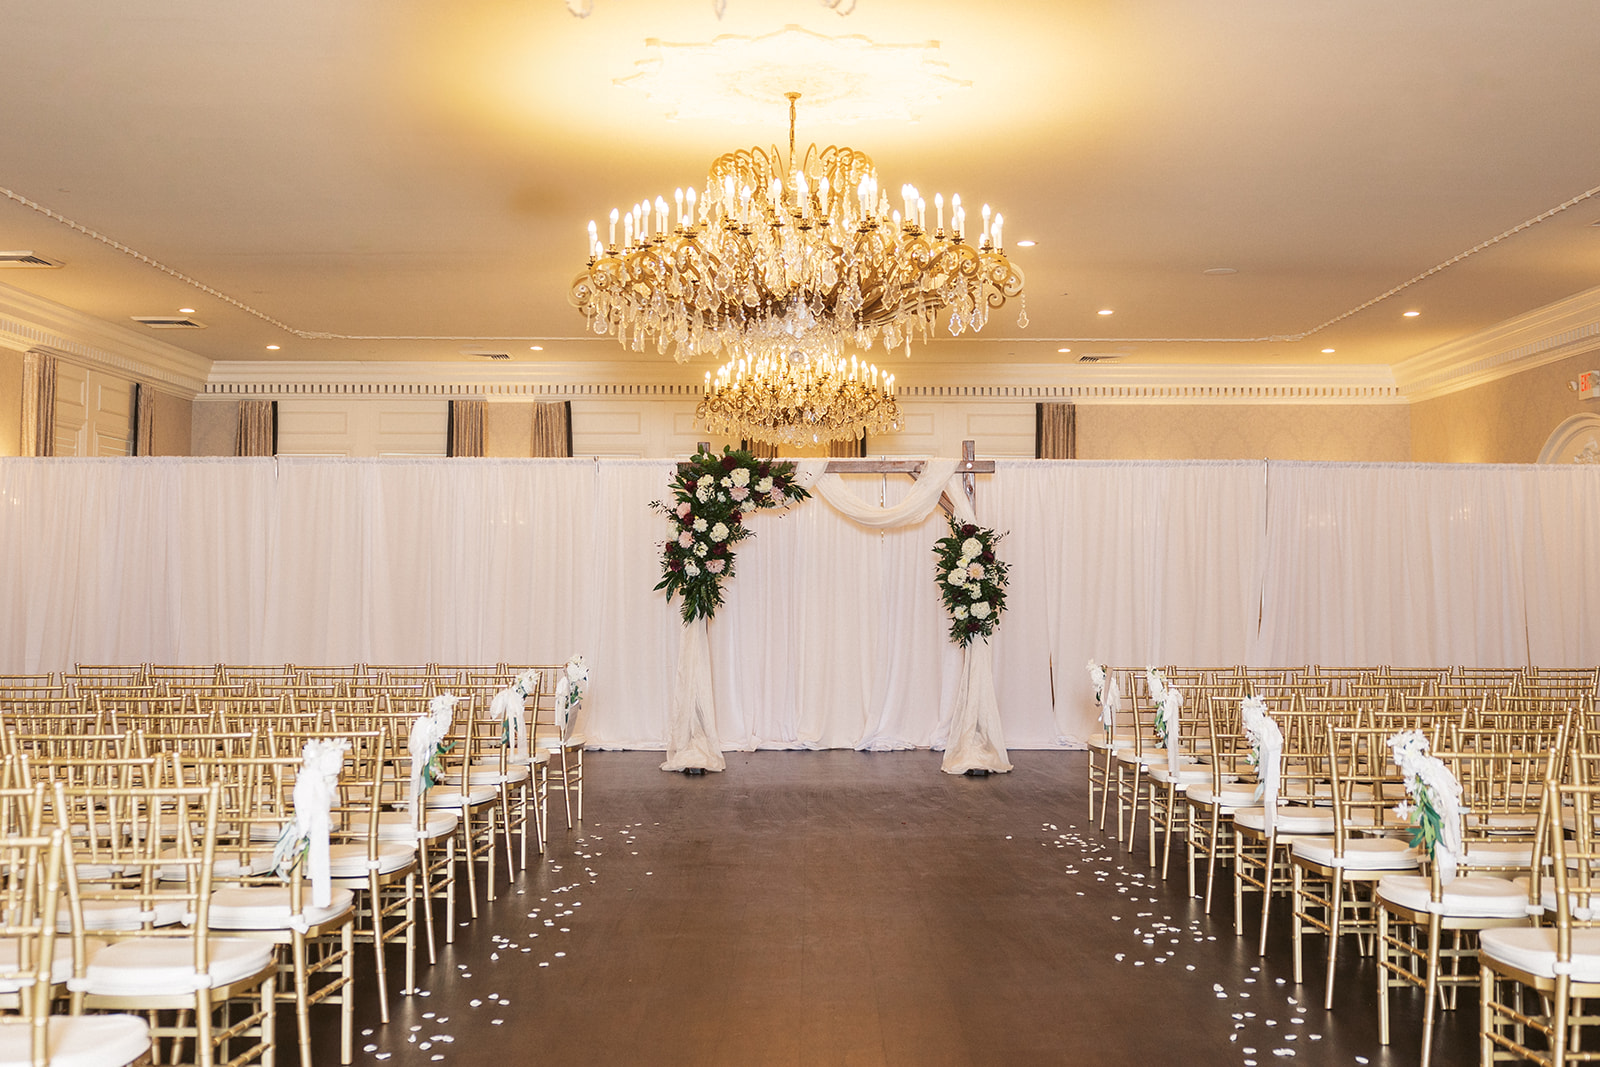 Details of a wedding ceremony set up with white drapes and a large chandelier at The Belle of Blue Bell